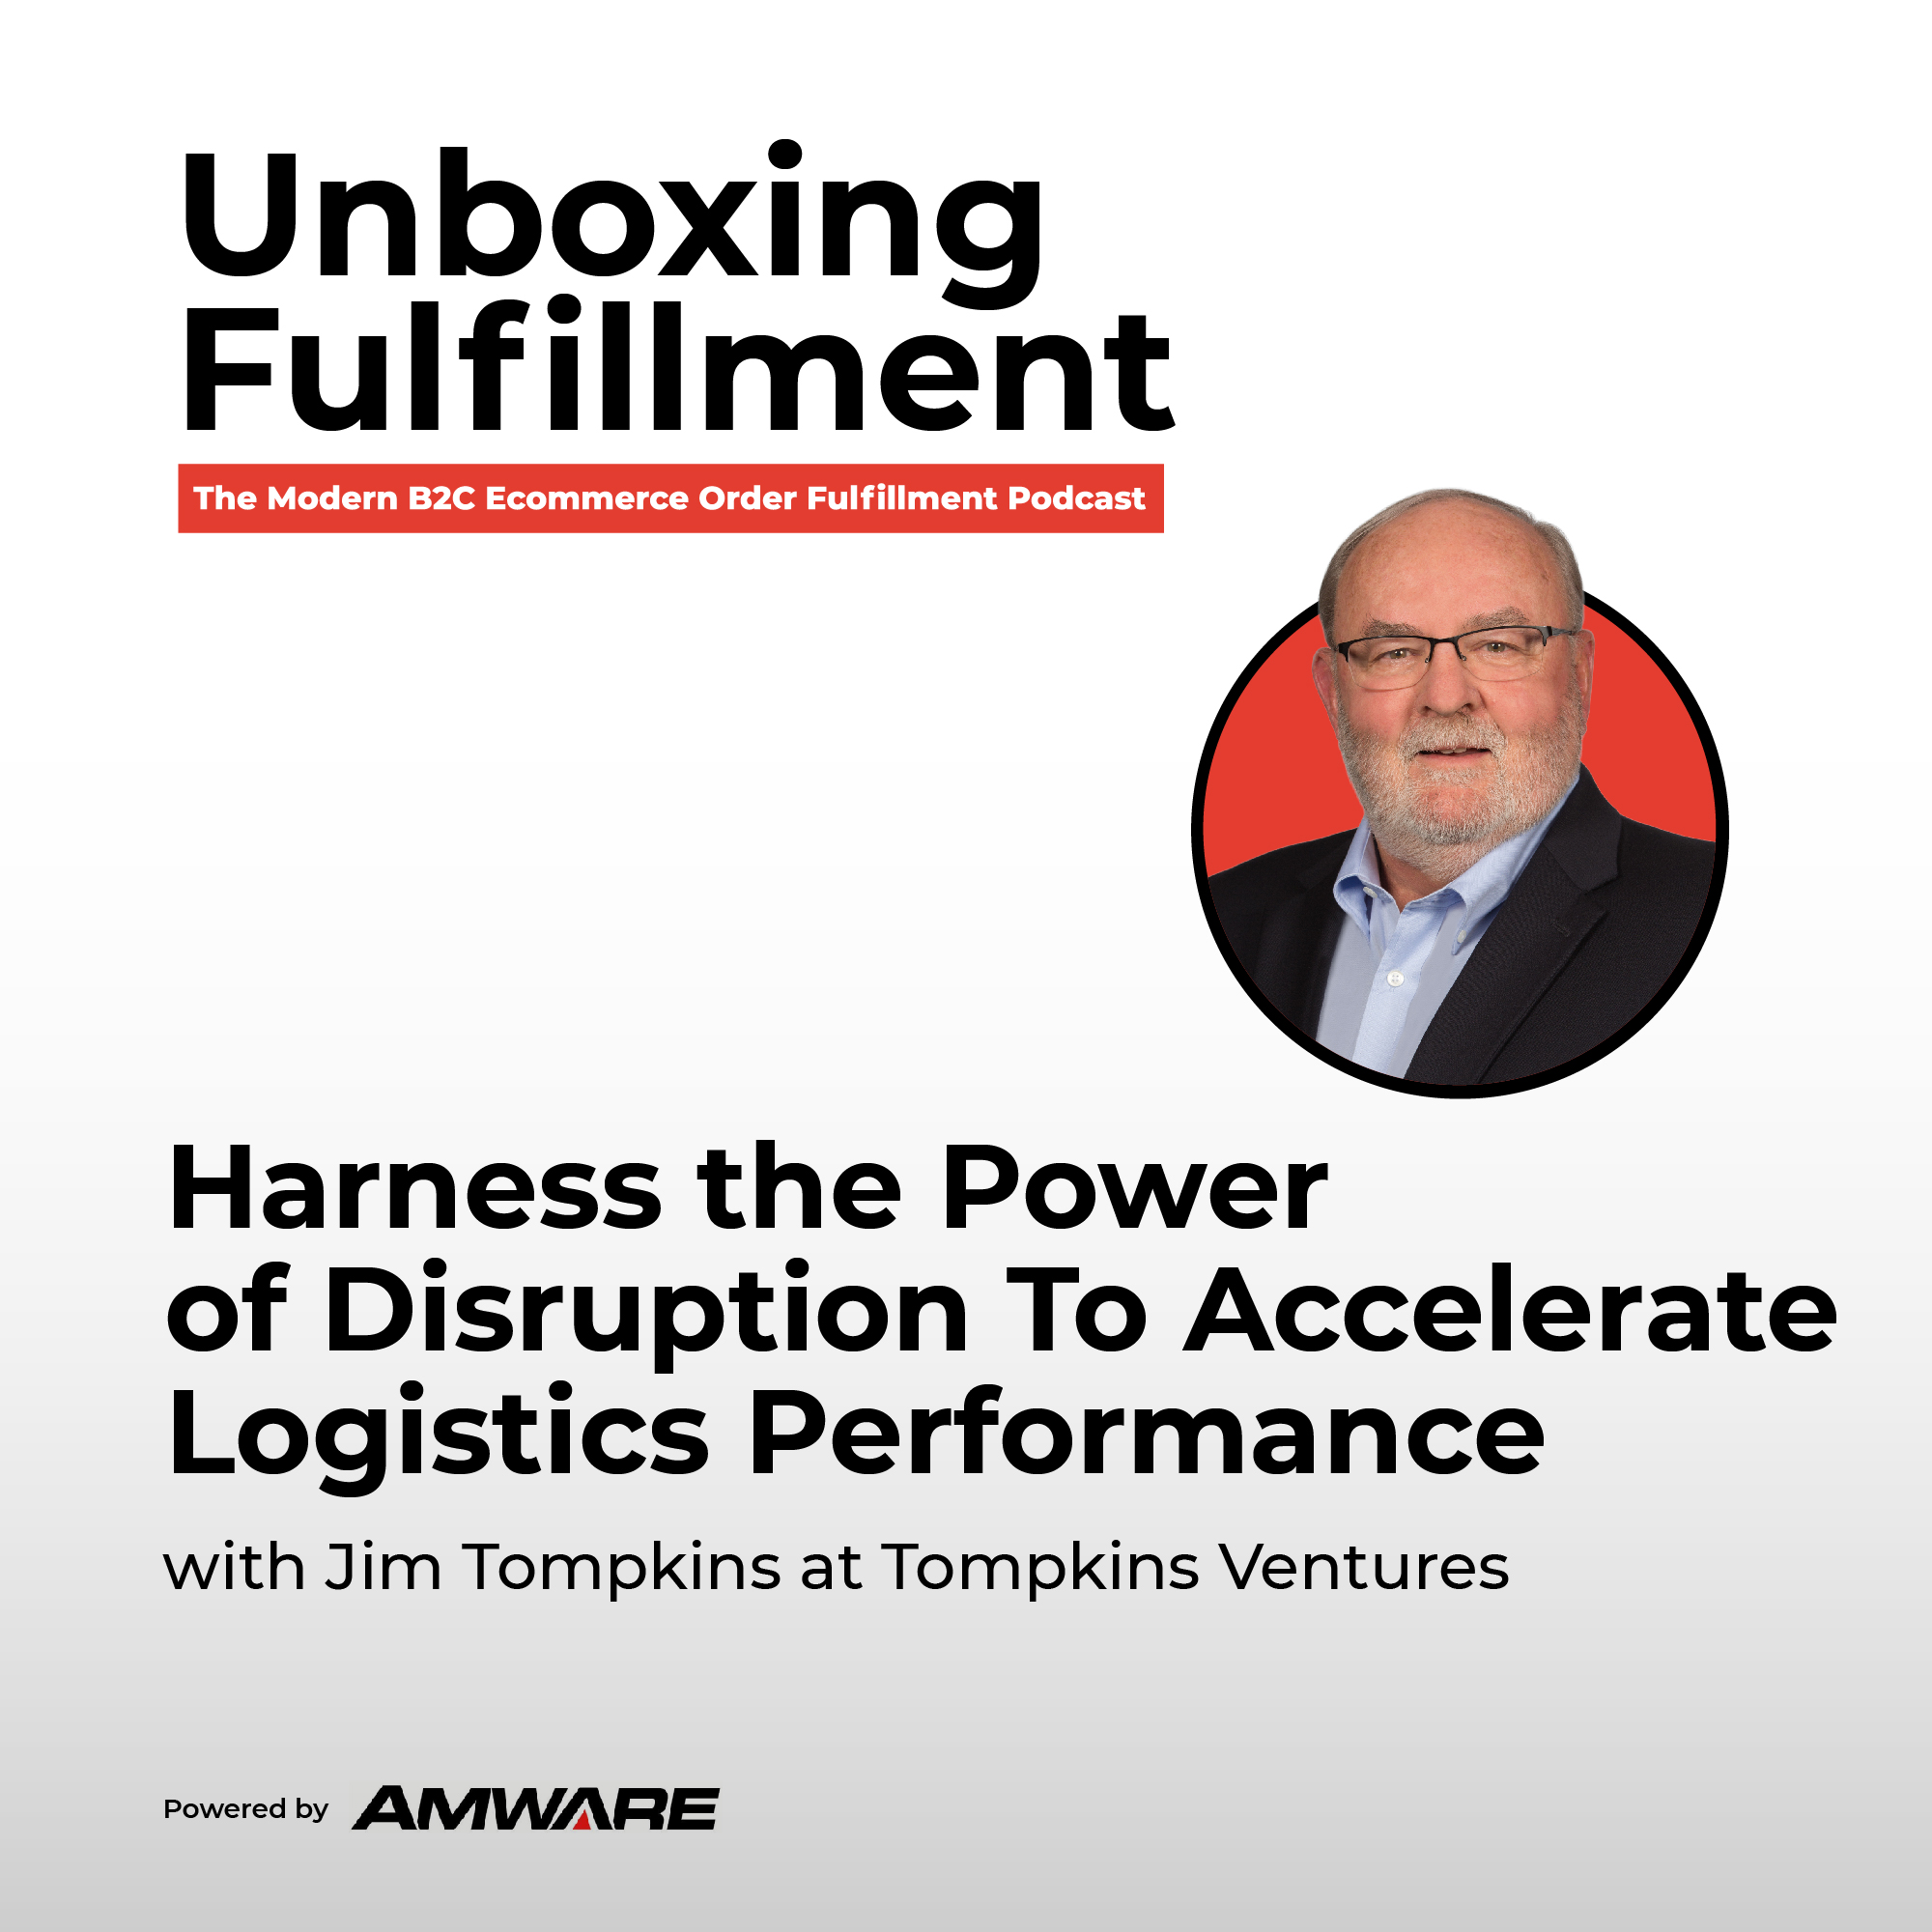 Harness the Power of Disruption To Accelerate Logistics Performance with Jim Tompkins at Tompkins Ventures